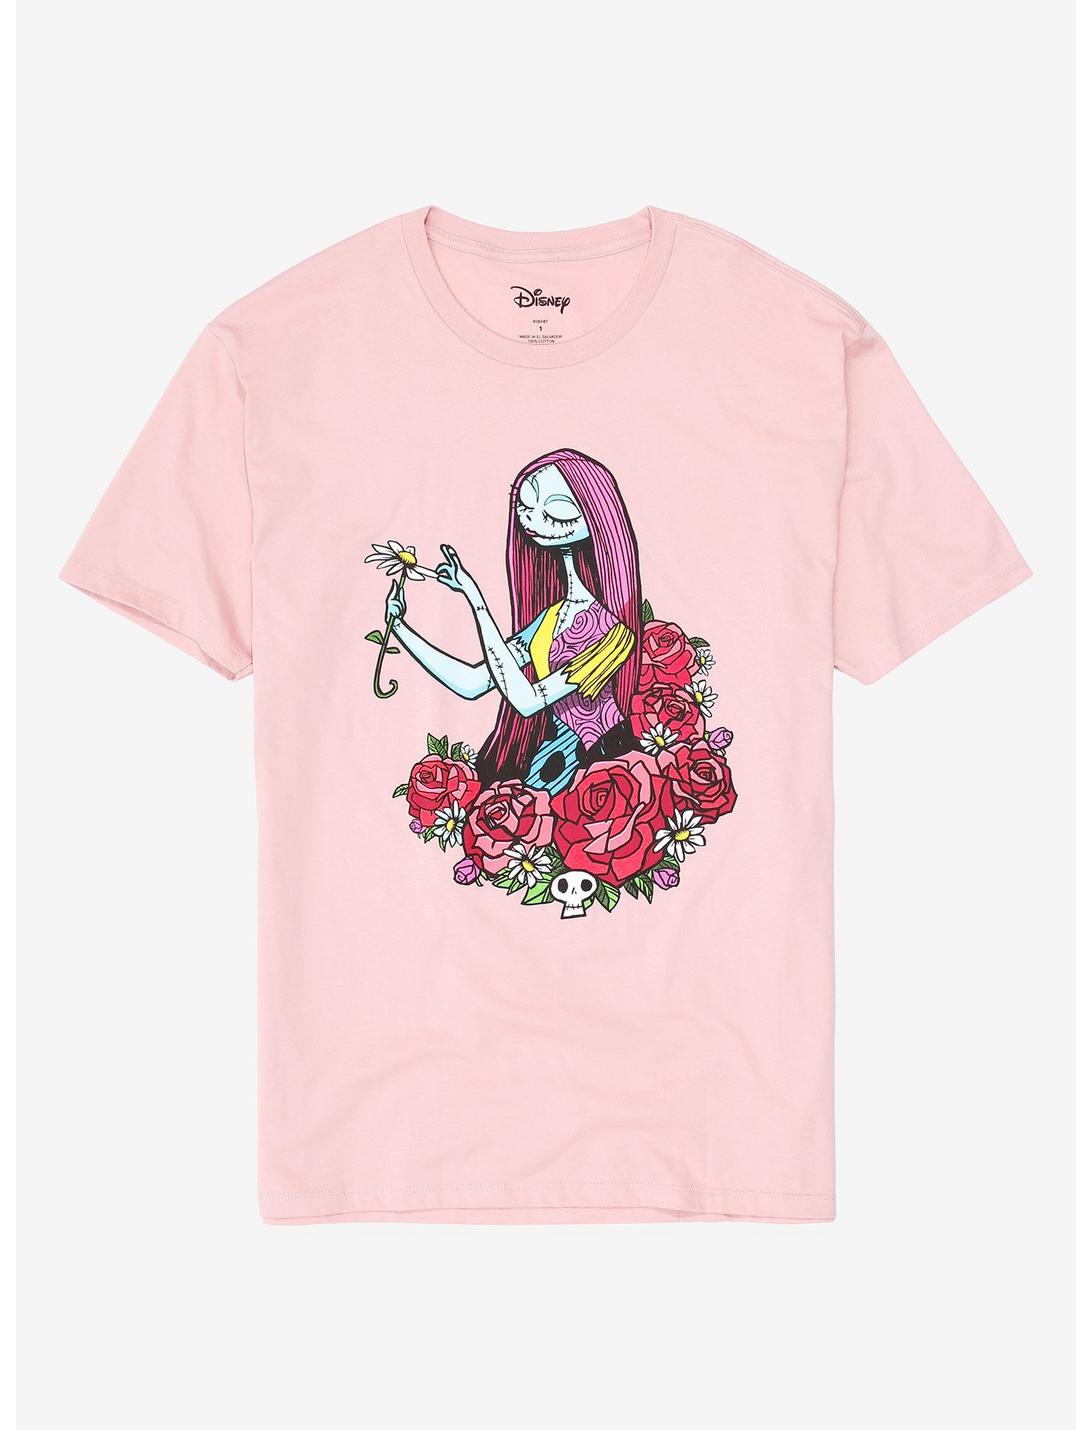 The Nightmare Before Christmas Sally Flowers Girls T-Shirt Plus Size, MULTI, hi-res